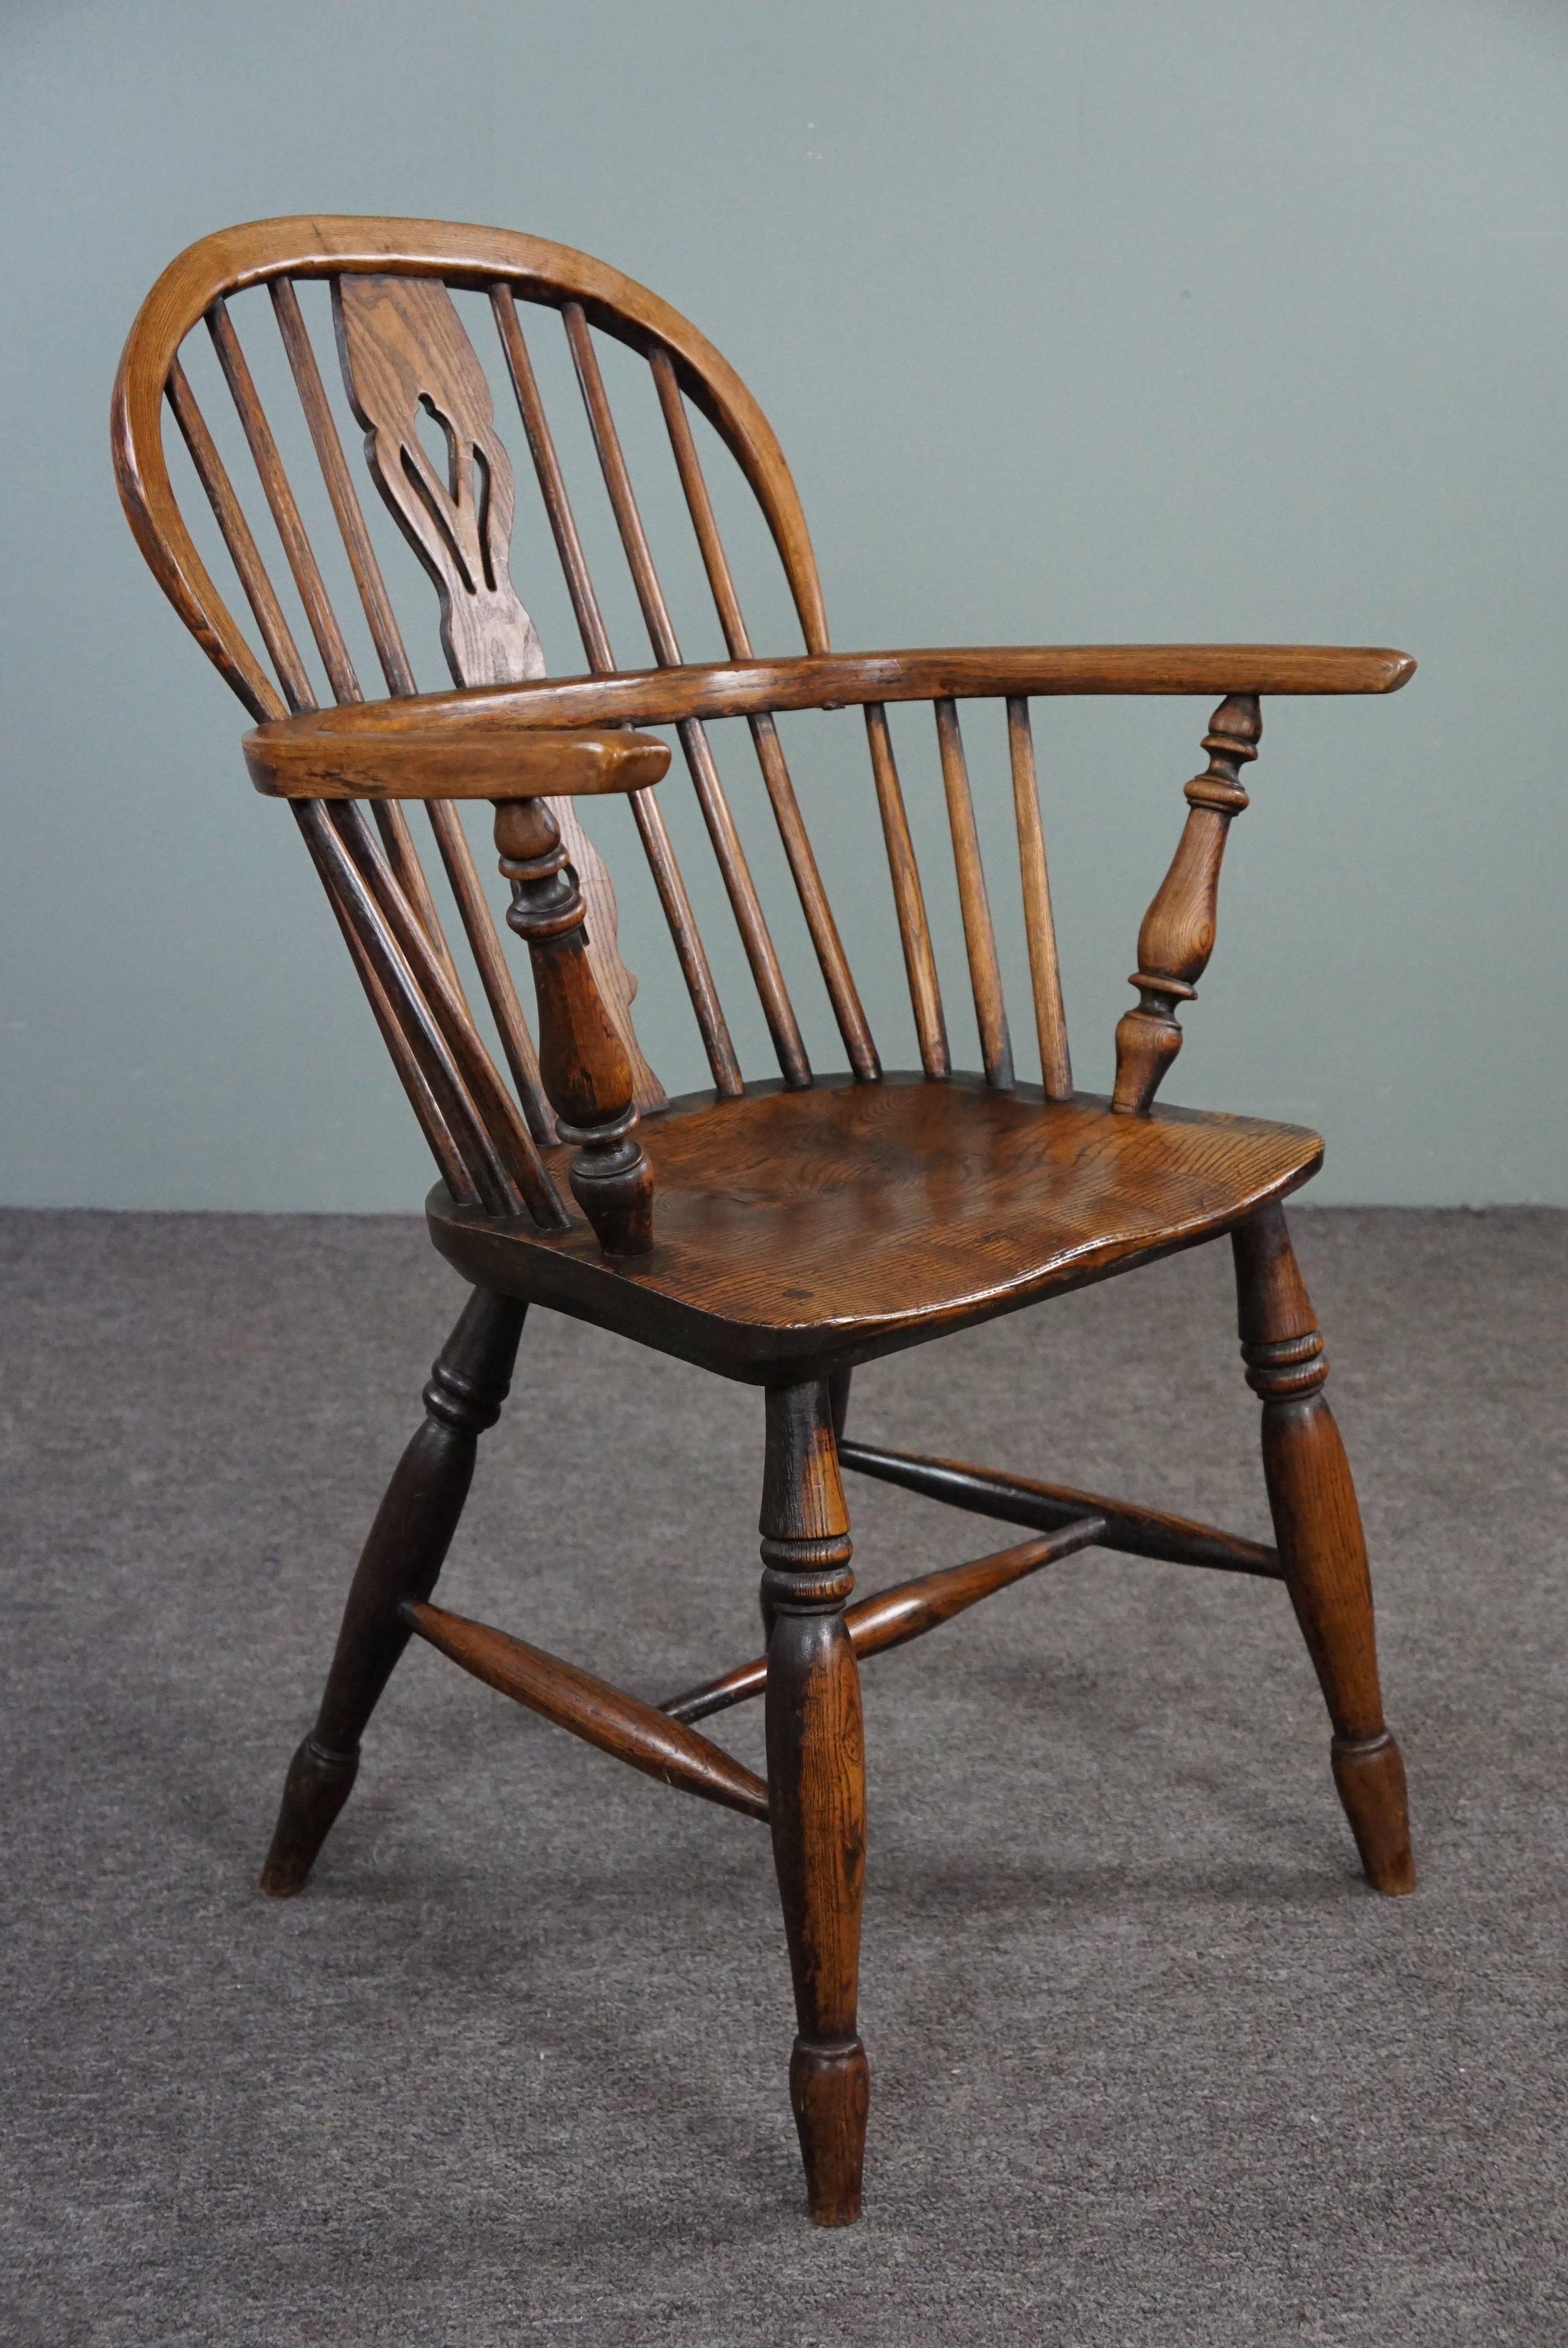 Offered is this beautiful antique armchair made of solid wood with a stunning patina.

This very beautiful antique English Windsor chair with a low backrest from the early 18th century has a barred backrest and a beautifully shaped thick solid